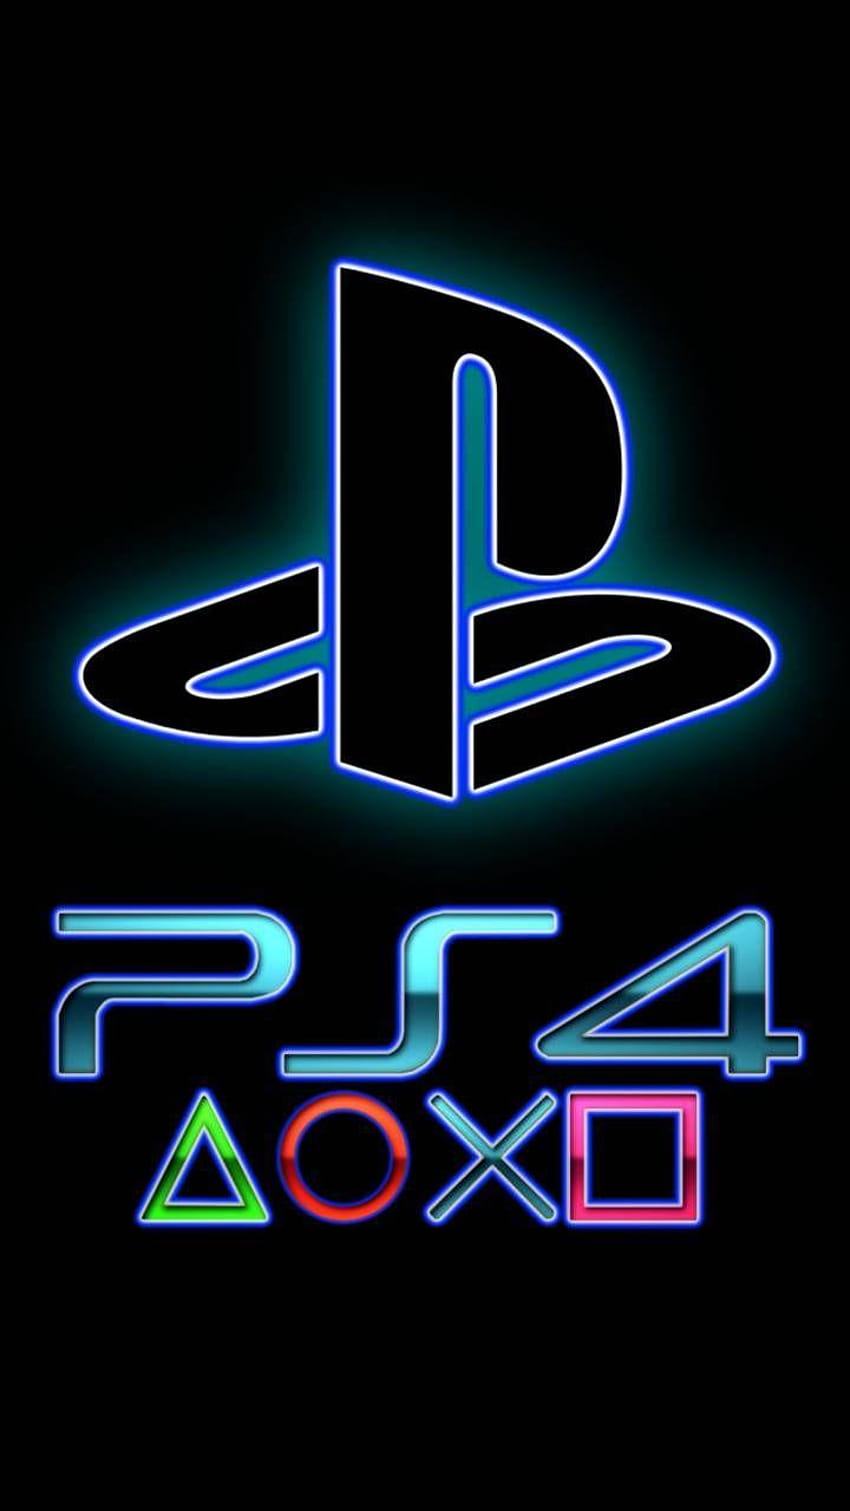 Awesome PS4, aesthetic gaming ps4 HD phone wallpaper